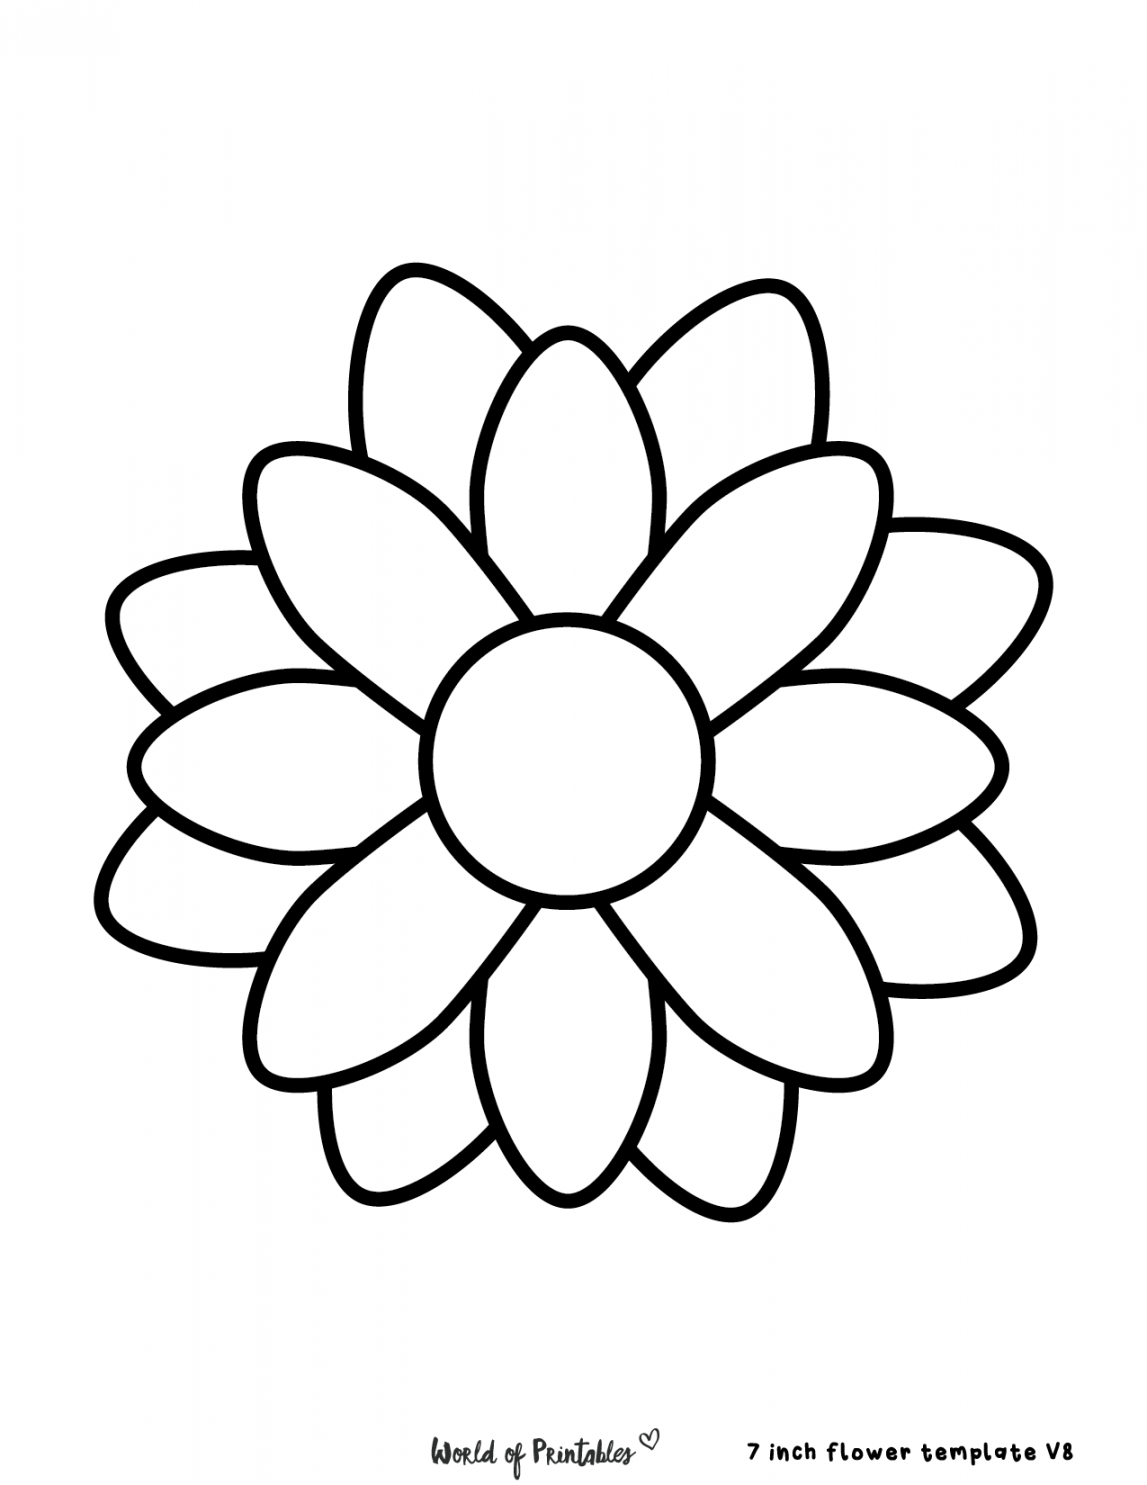 Best Free Flower Templates - World of Printables